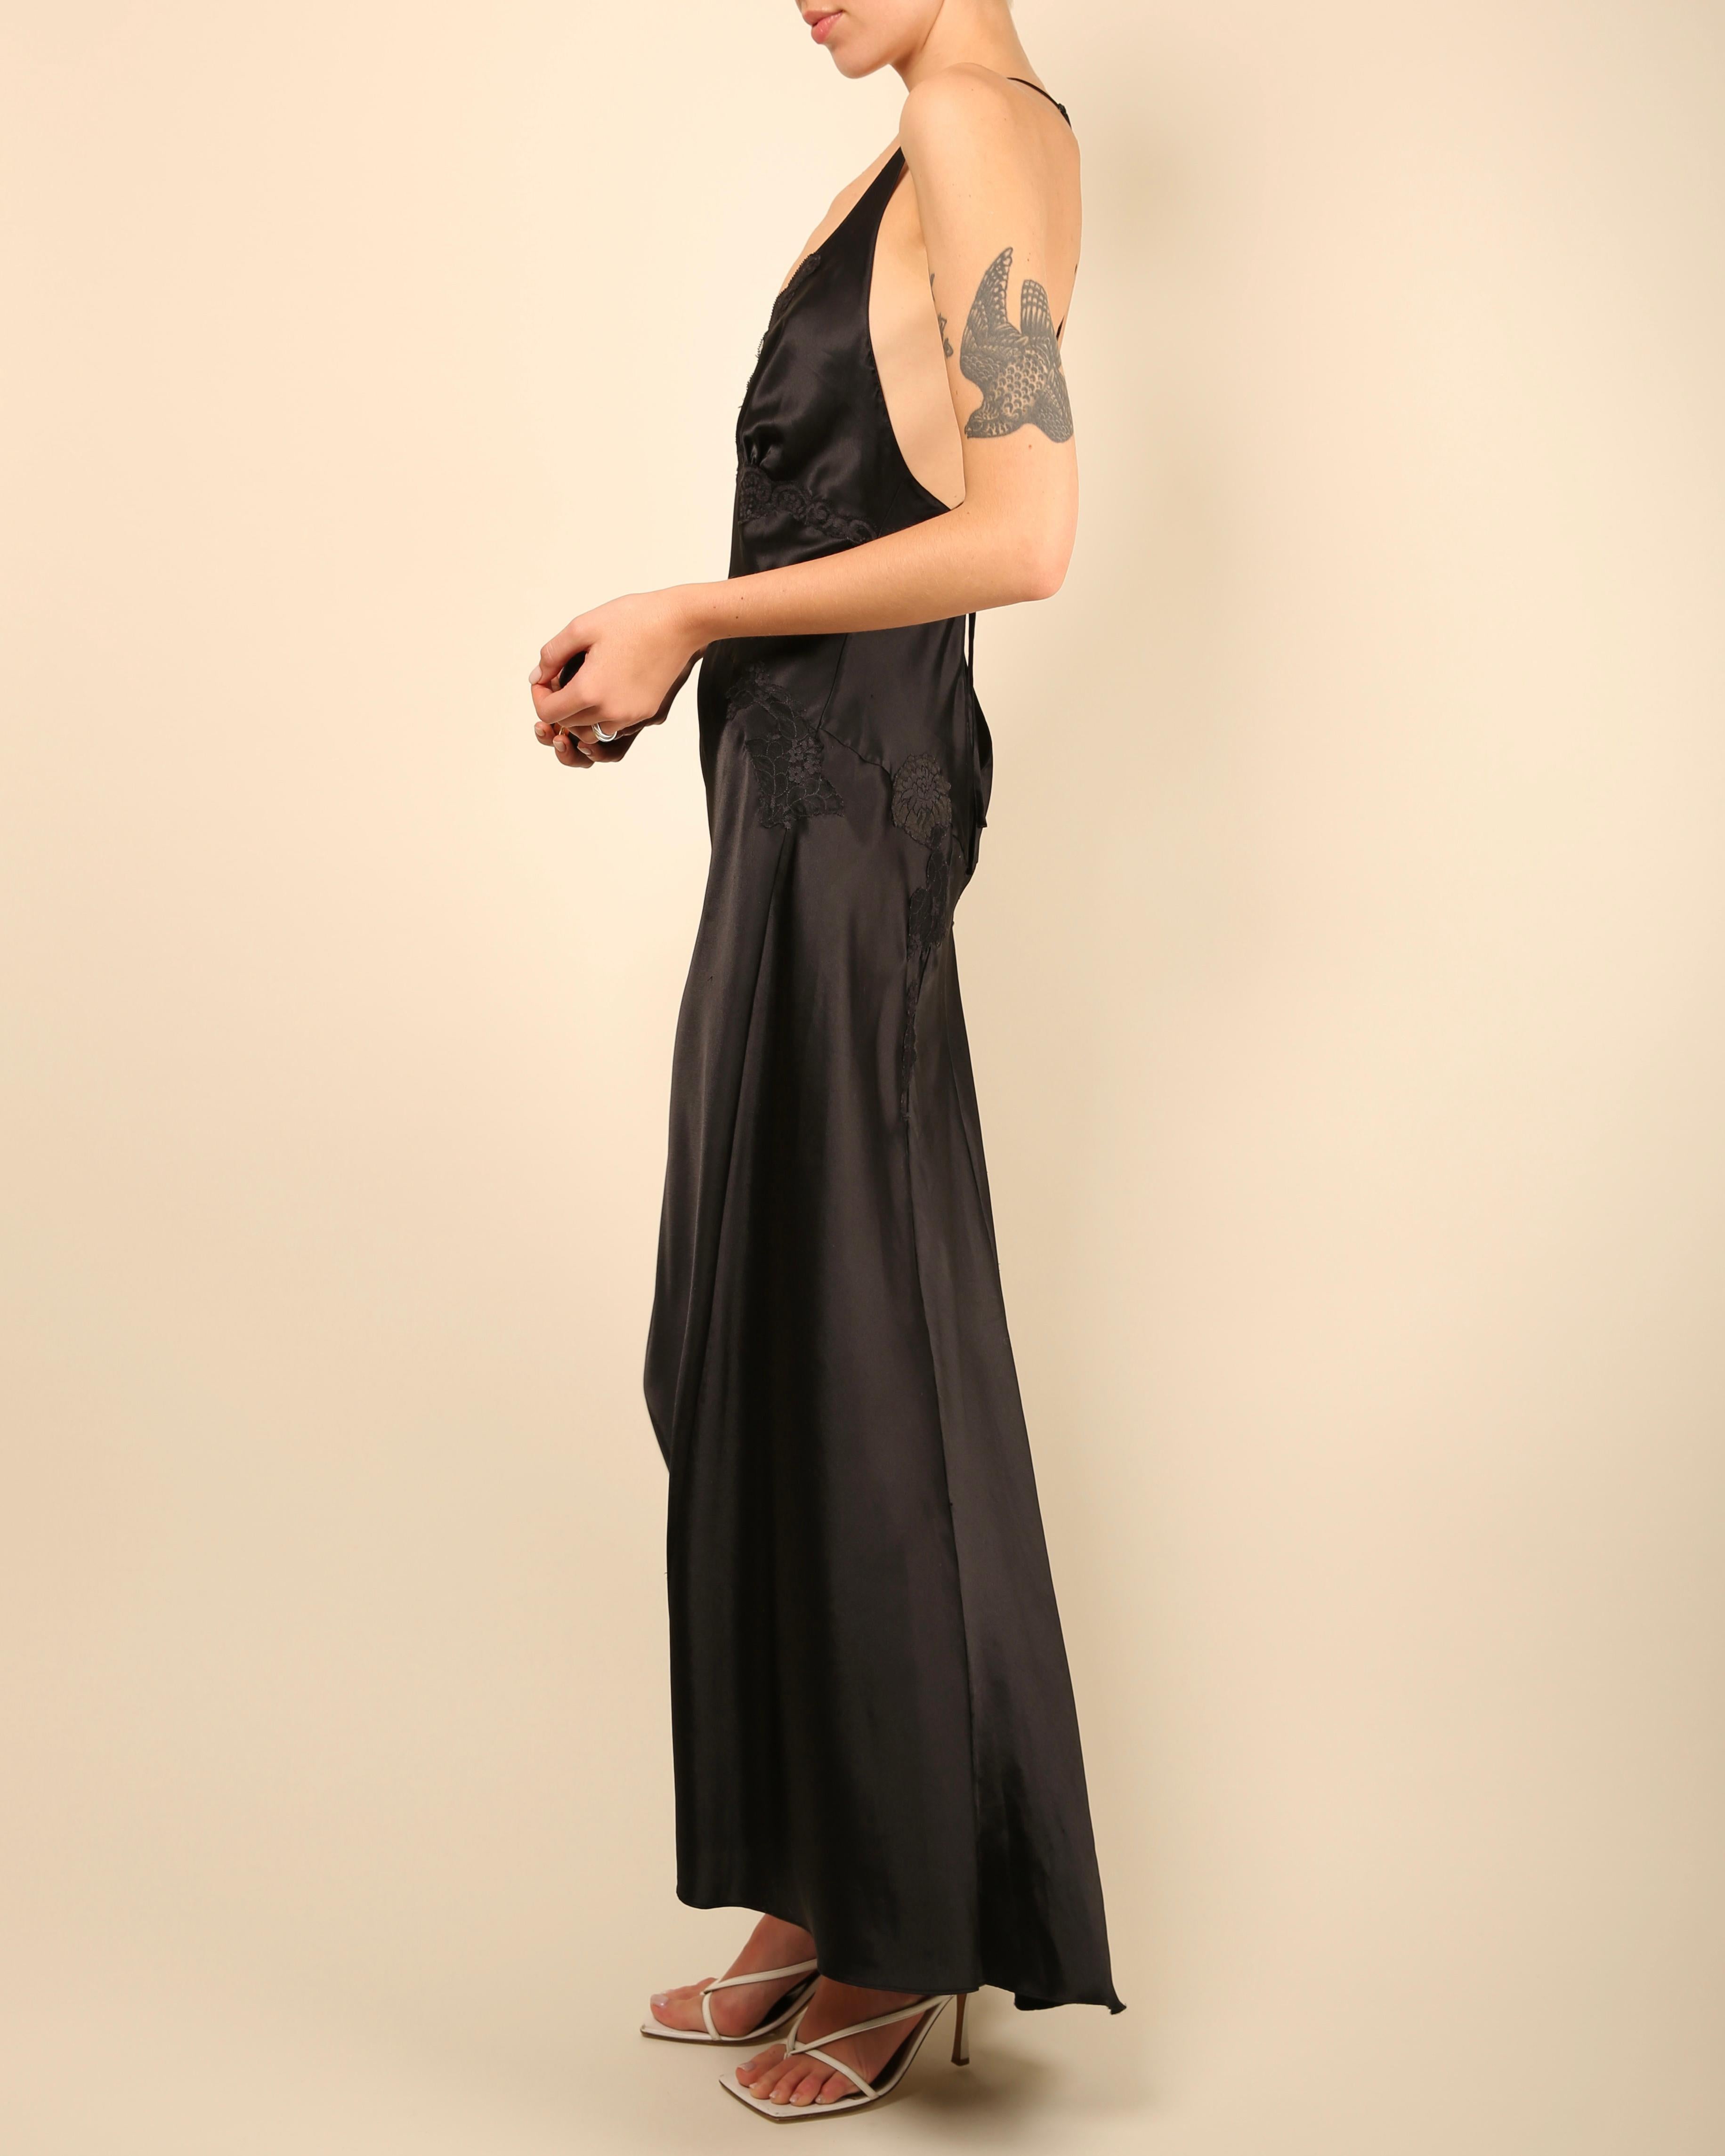 Women's Vintage black satin silk lace plunging backless night gown slip maxi dress M For Sale